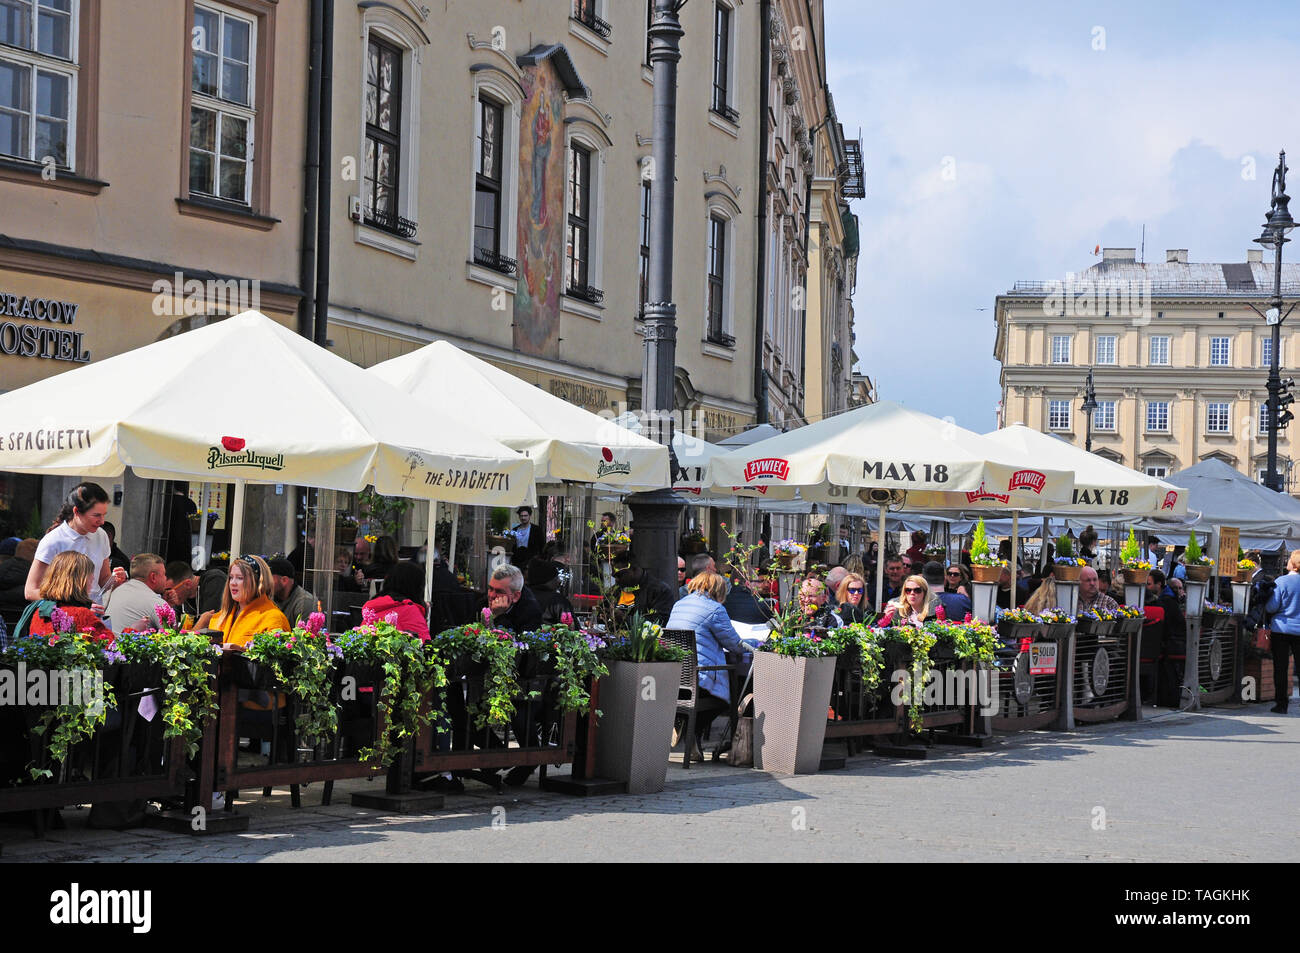 People eating out in the Old City Square, Krakow, Poland. Stock Photo